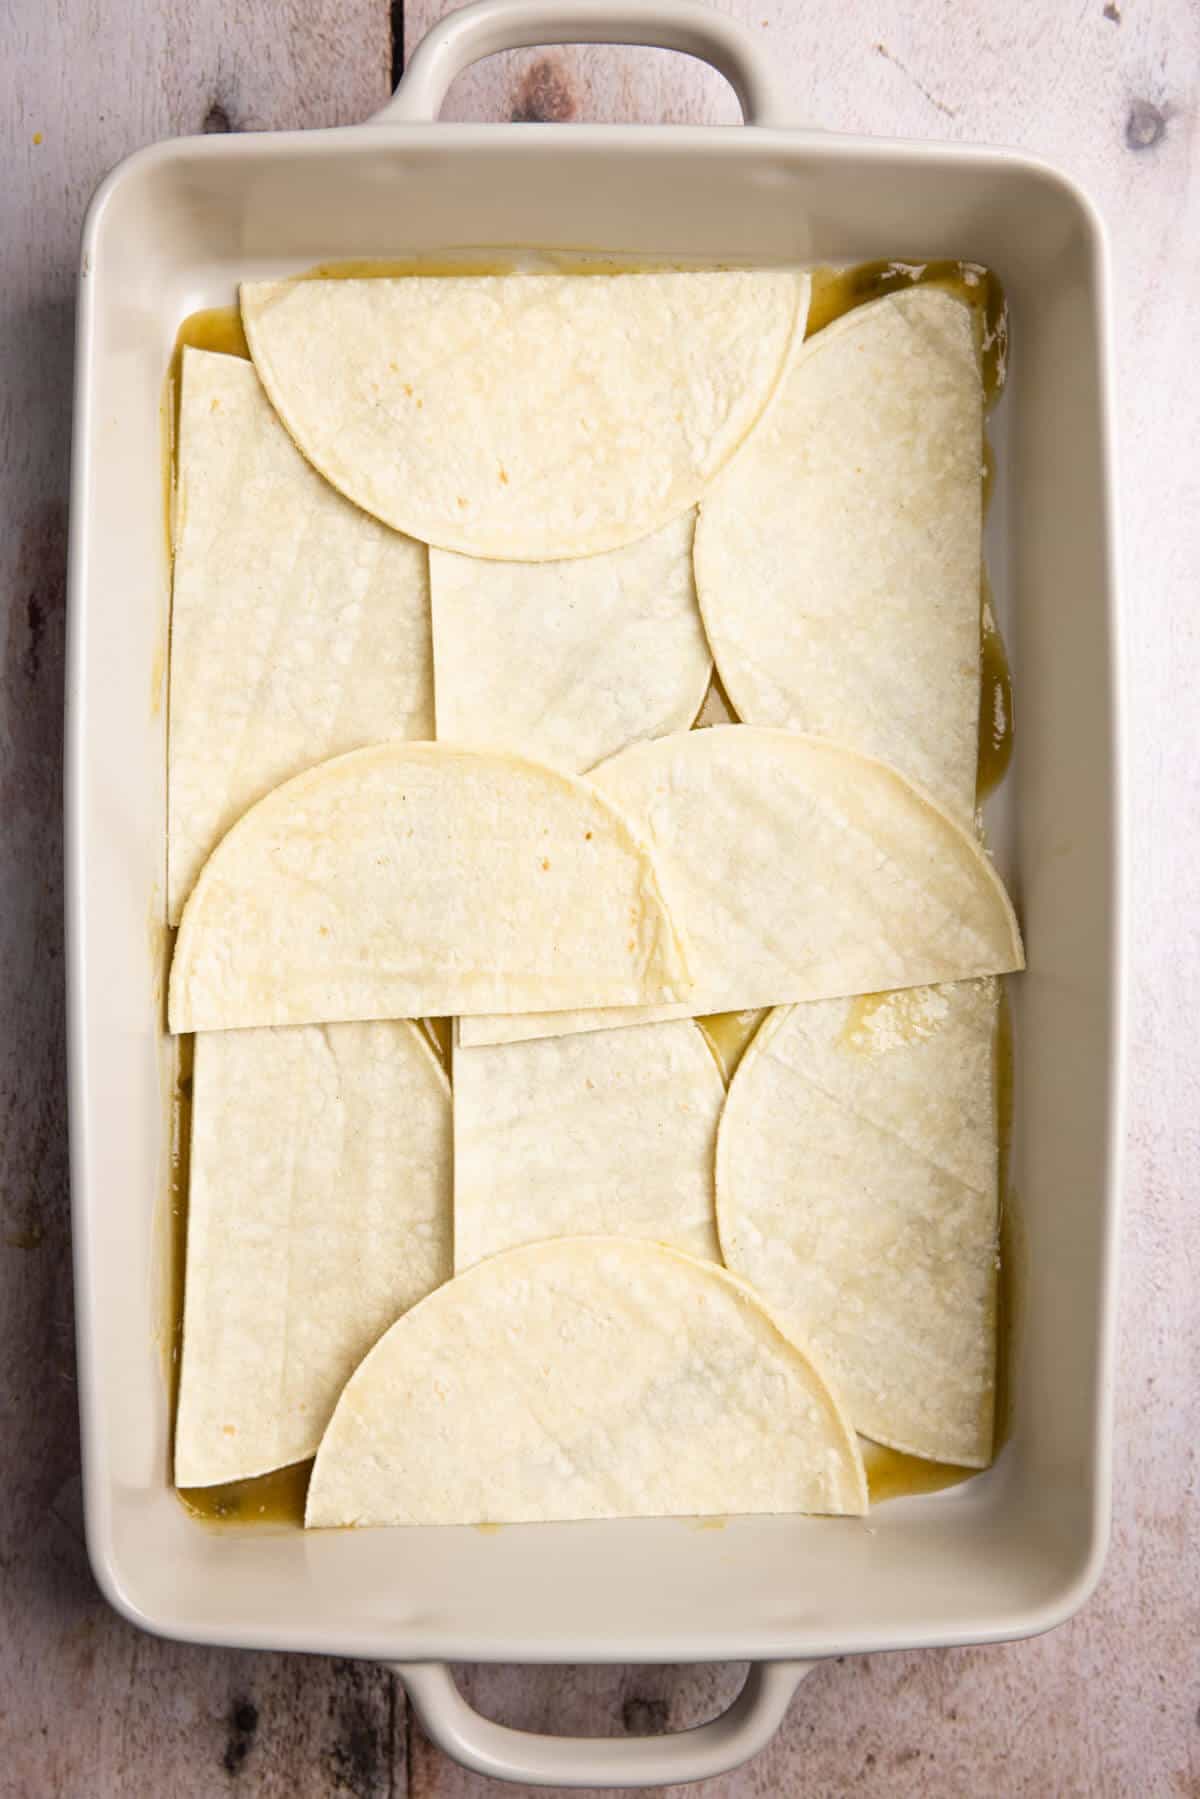 A 9x13 baking dish lined with halved corn tortillas.